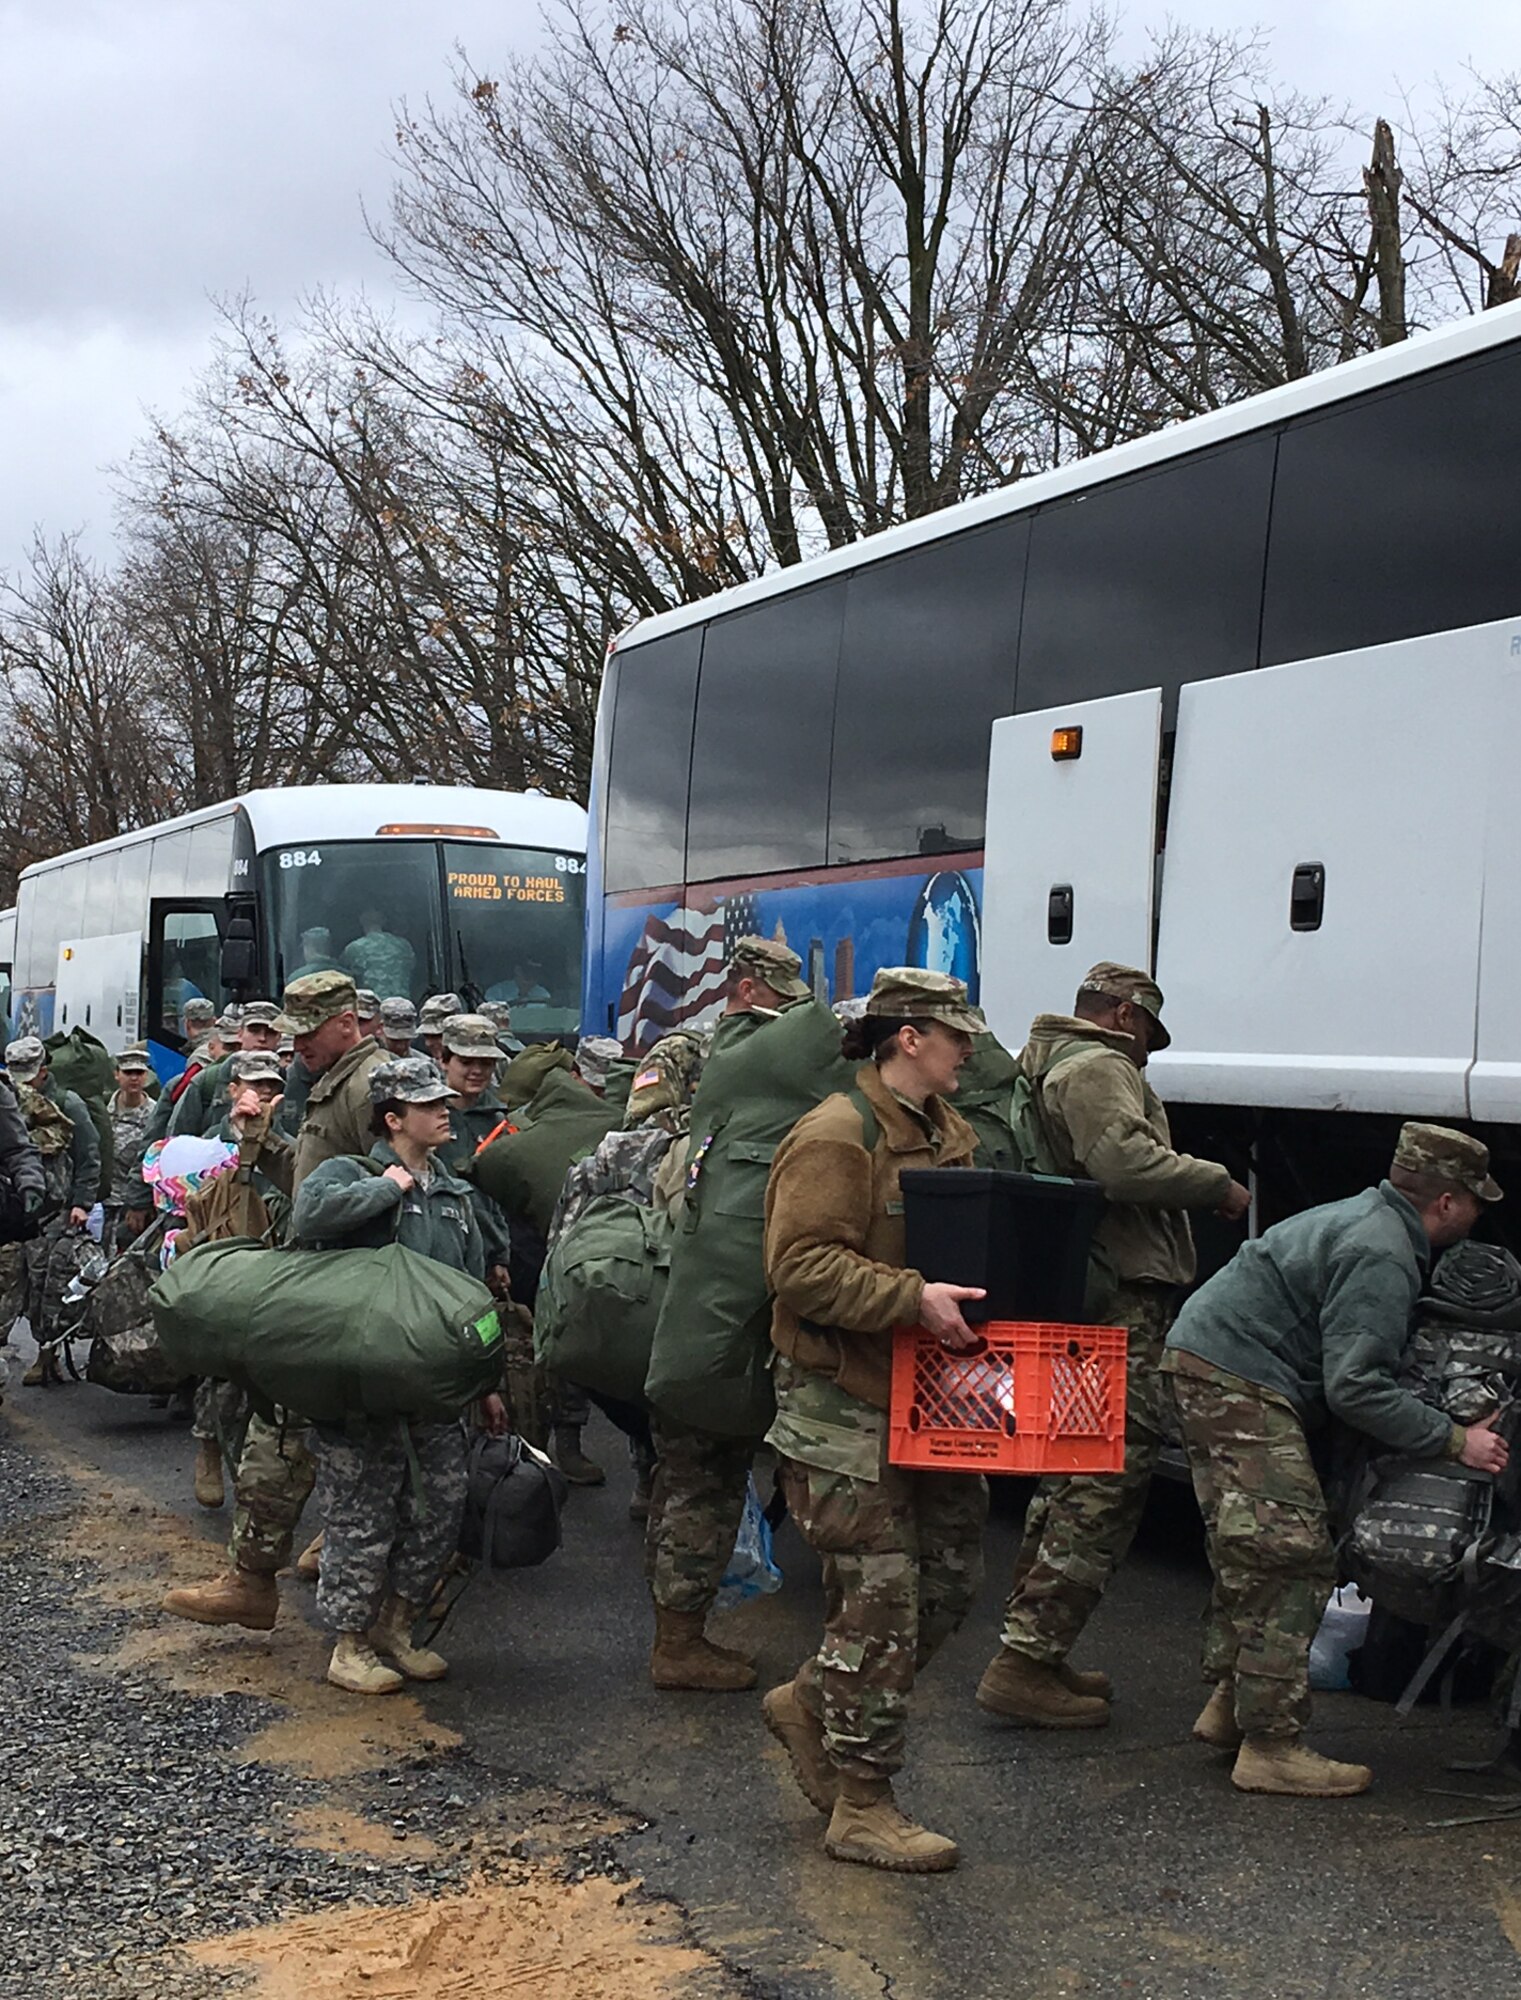 Pennsylvania National Guardsmen at Fort Indiantown Gap, Annville, Pa., prepare to head to Washington, D.C. Jan 18, 2017, to support the 58th Presidential Inauguration. Along with about 7,000 troops across the nation, approximately 2,000 Commonwealth Soldiers and Airmen were tasked with inaugural missions including crowd management, traffic control, emergency services and communication and ceremonial duties. (U.S. Air National Guard photo by 2nd Lt. Susan Penning/Released) 